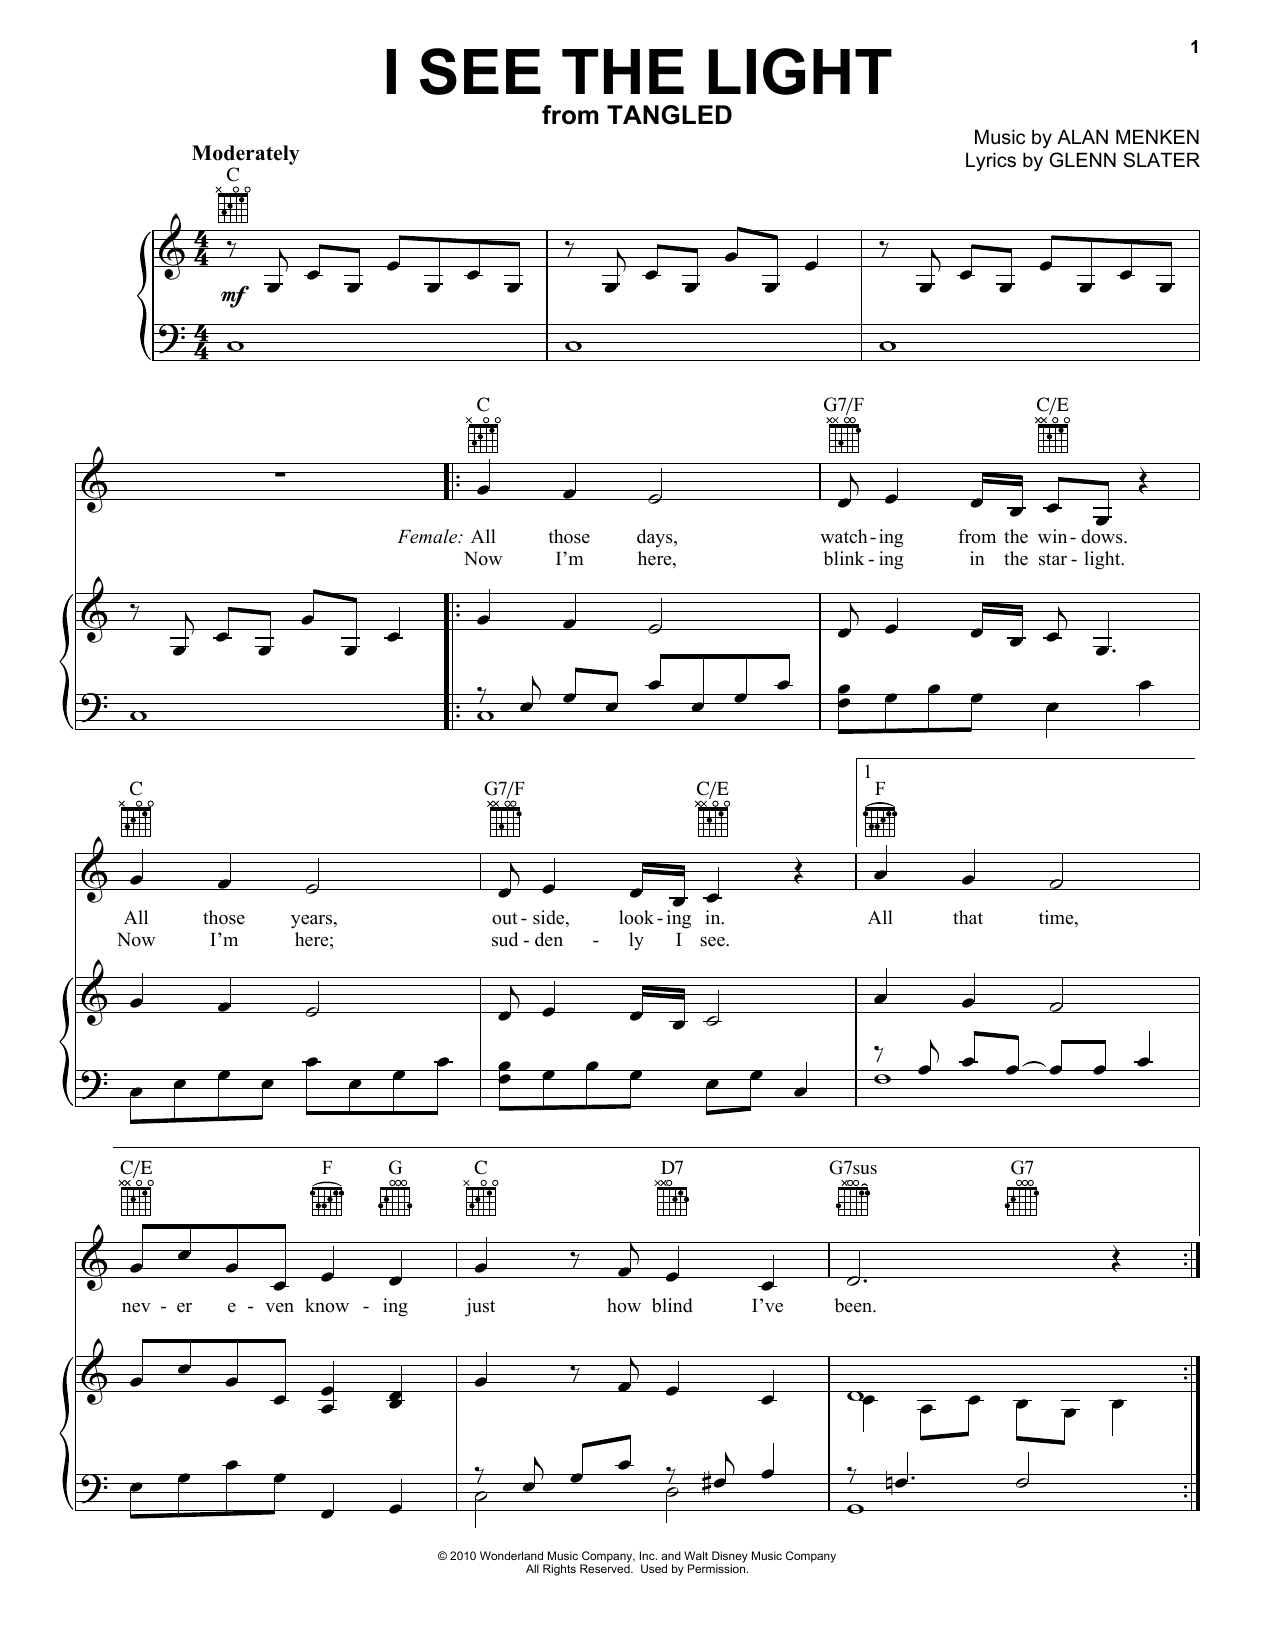 Mandy See The Light (from Disney's Tangled)" Sheet Music PDF Notes, Chords | Disney Score Piano, Vocal & Guitar (Right-Hand Melody) Download Printable. SKU: 77203